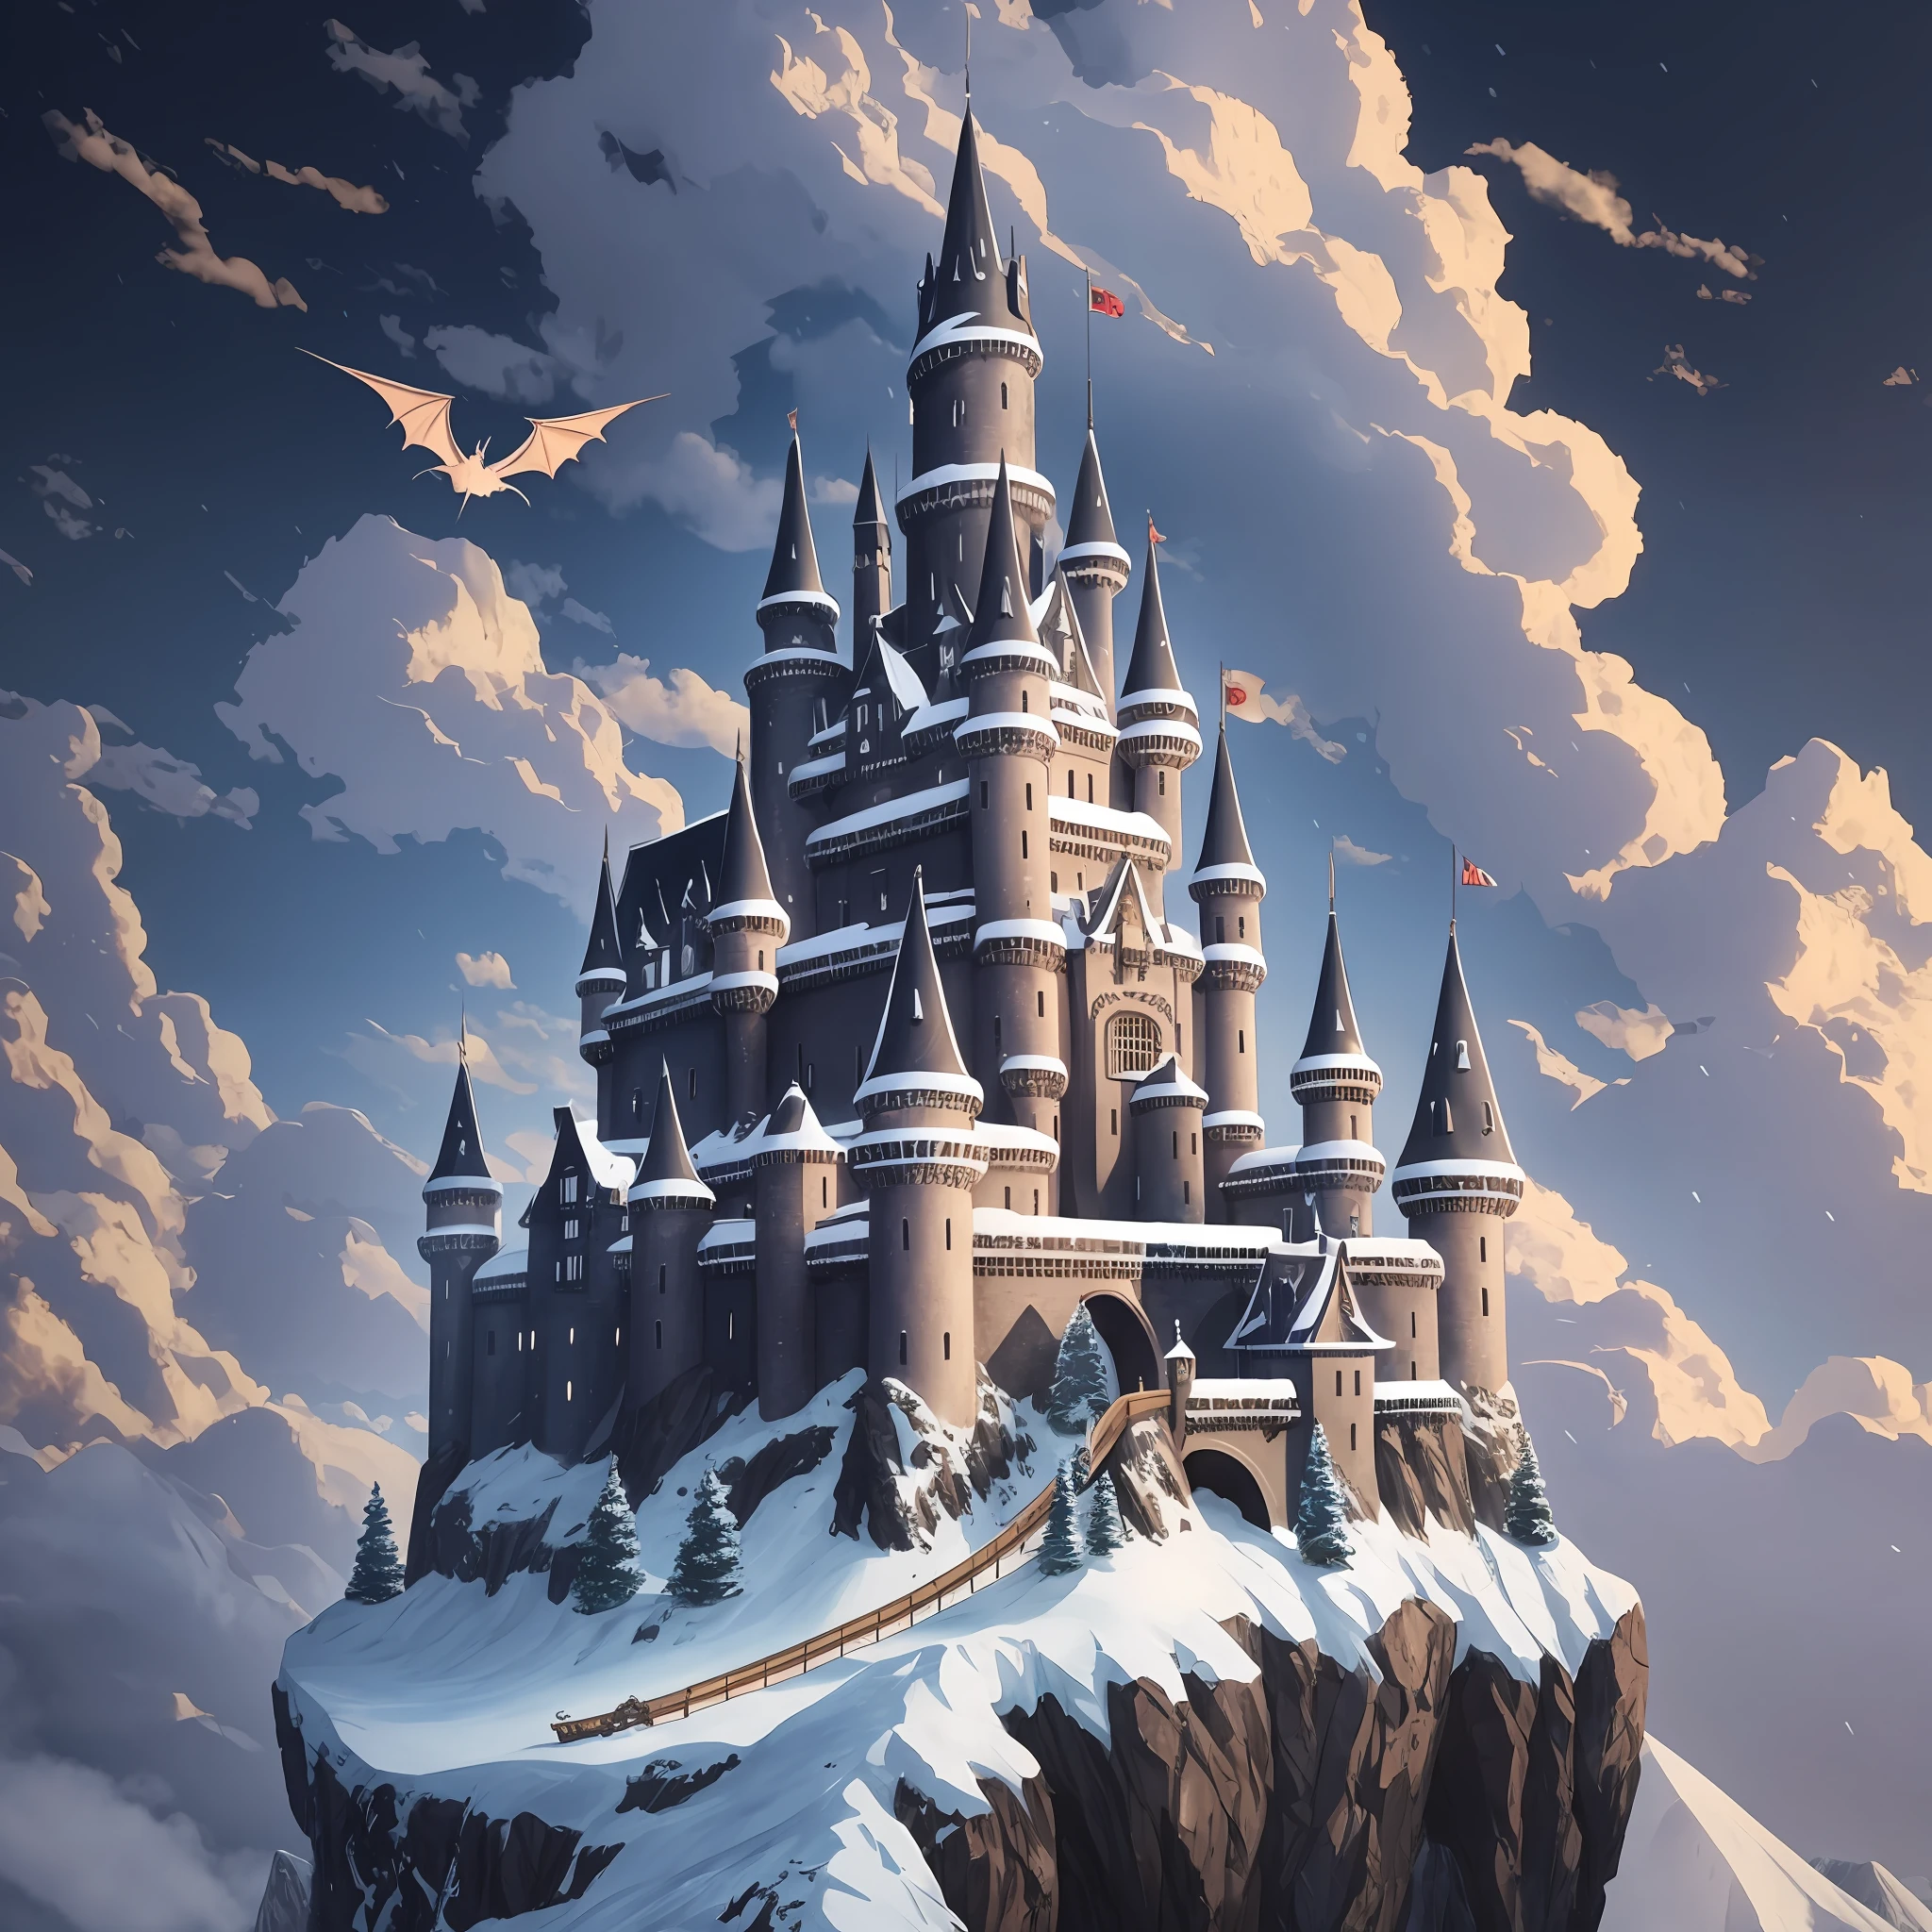 A black castle on top of a snowy mountain, with a dragon flying 